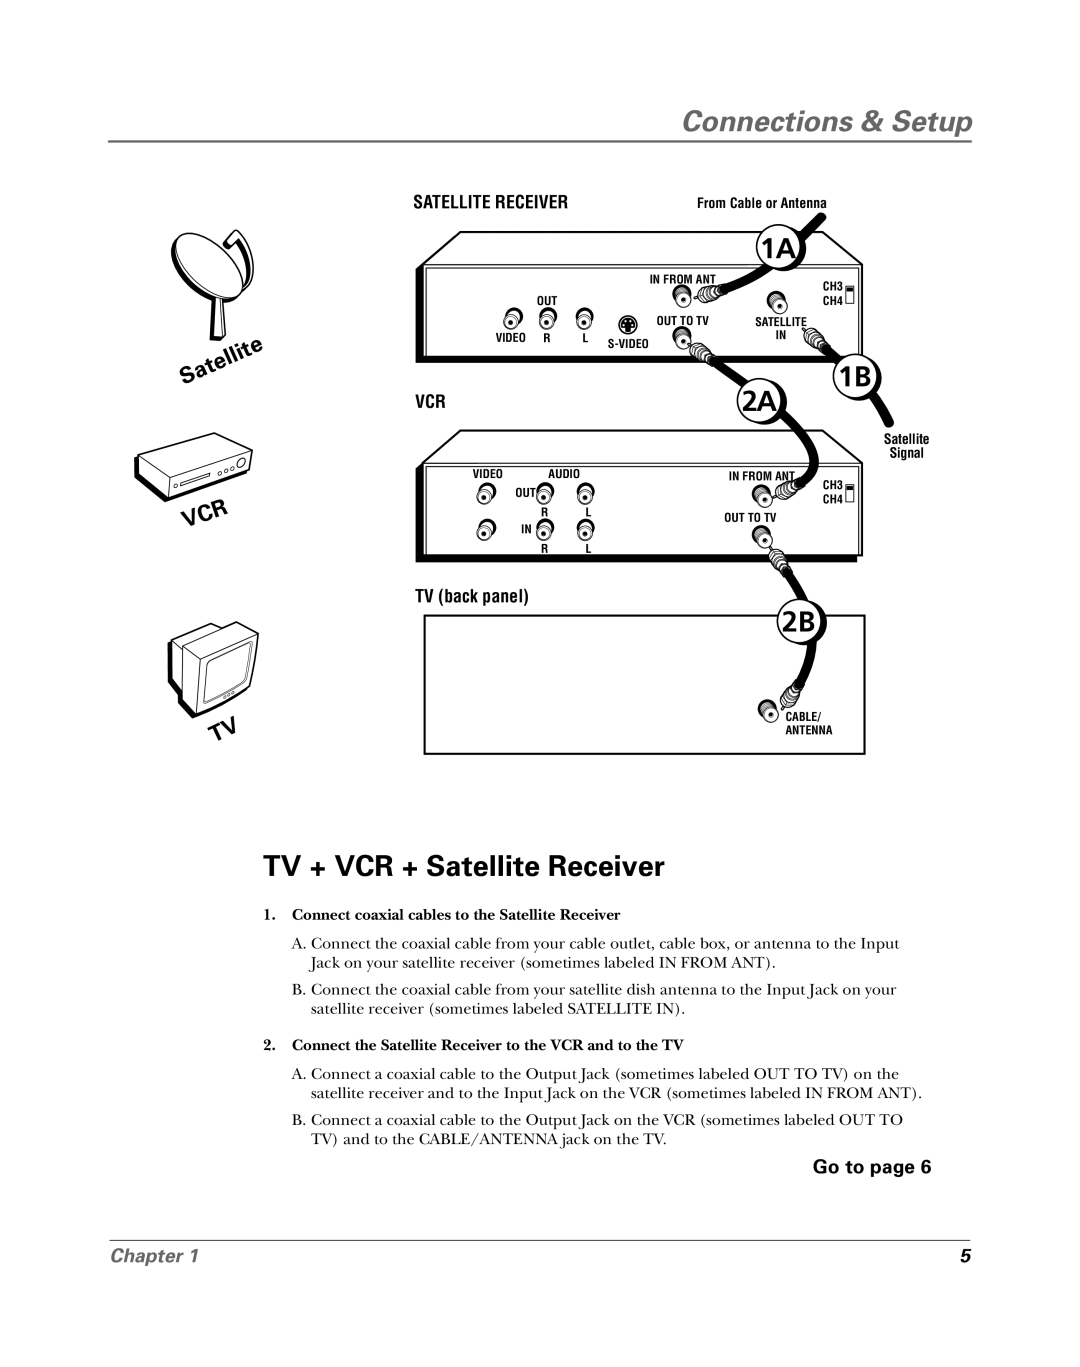 RCA 15956220 manual TV + VCR + Satellite Receiver, Connections & Setup, Go to page, Chapter, TV back panel 